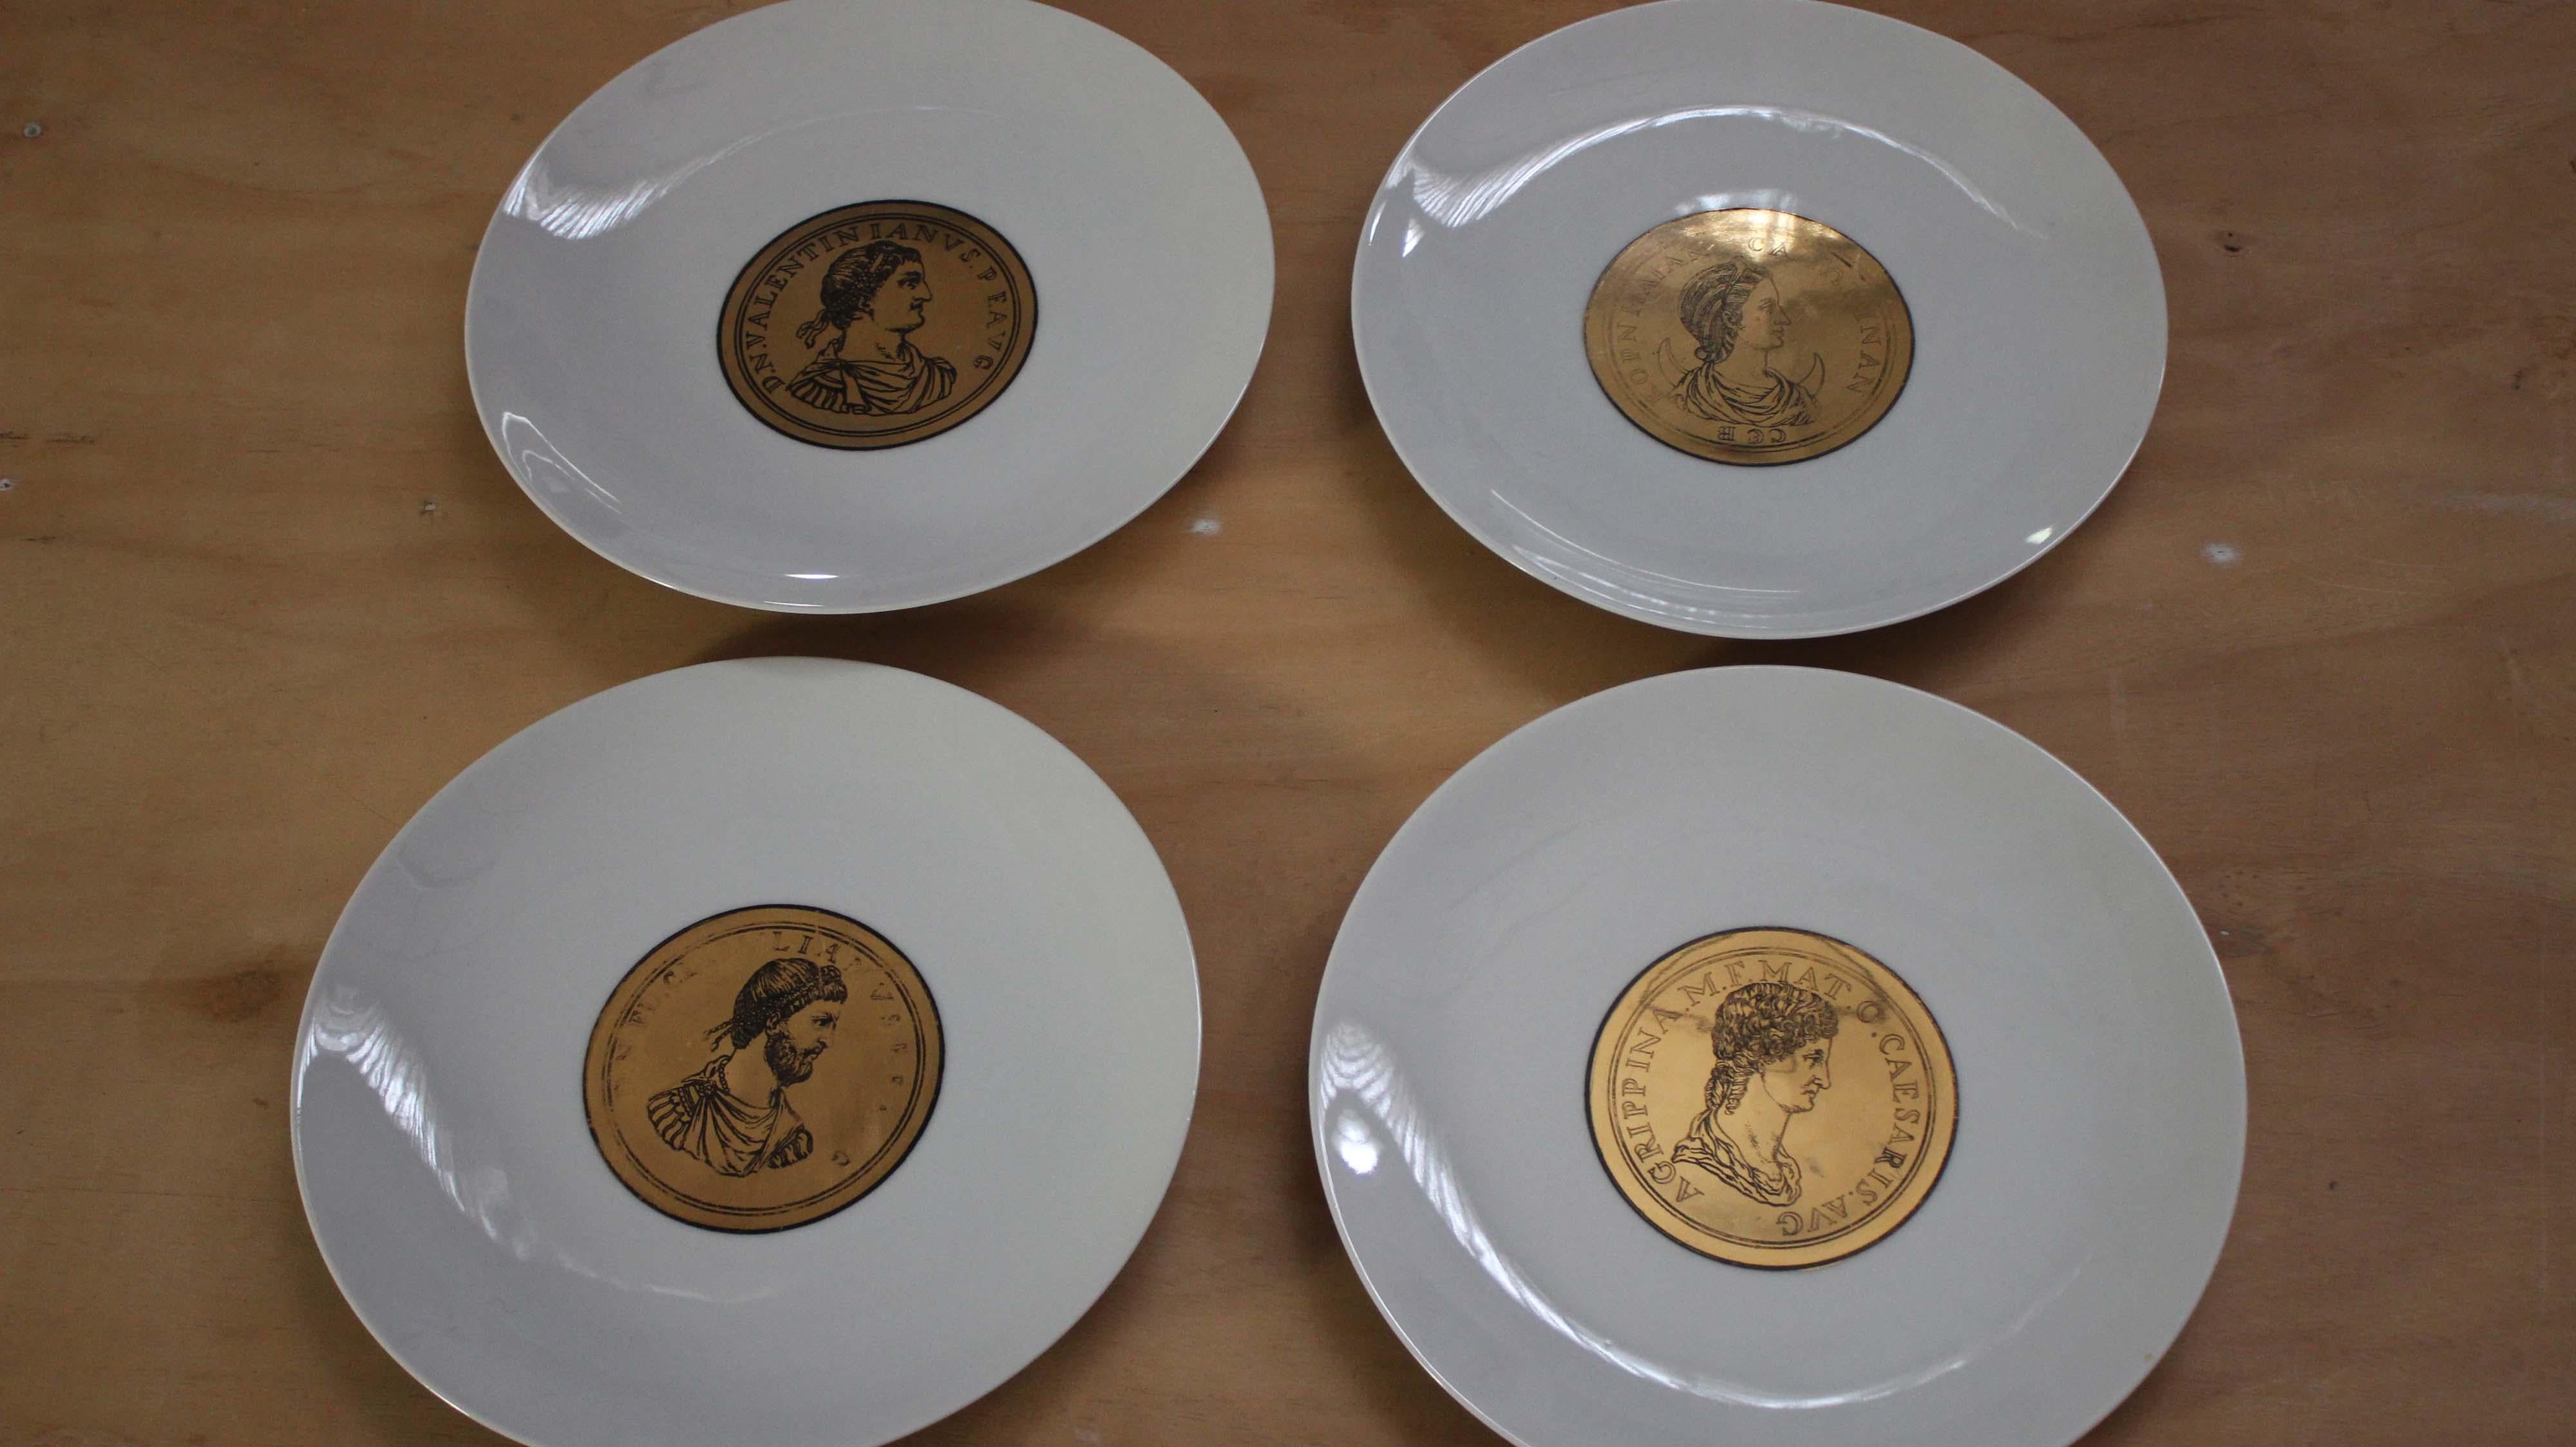 Atelier Fornasetti
Rare set of 4 plates with Emperor profiles printed on round gilded medals. Signed by Atelier Fornasetti,made in Italy in the 1940s.